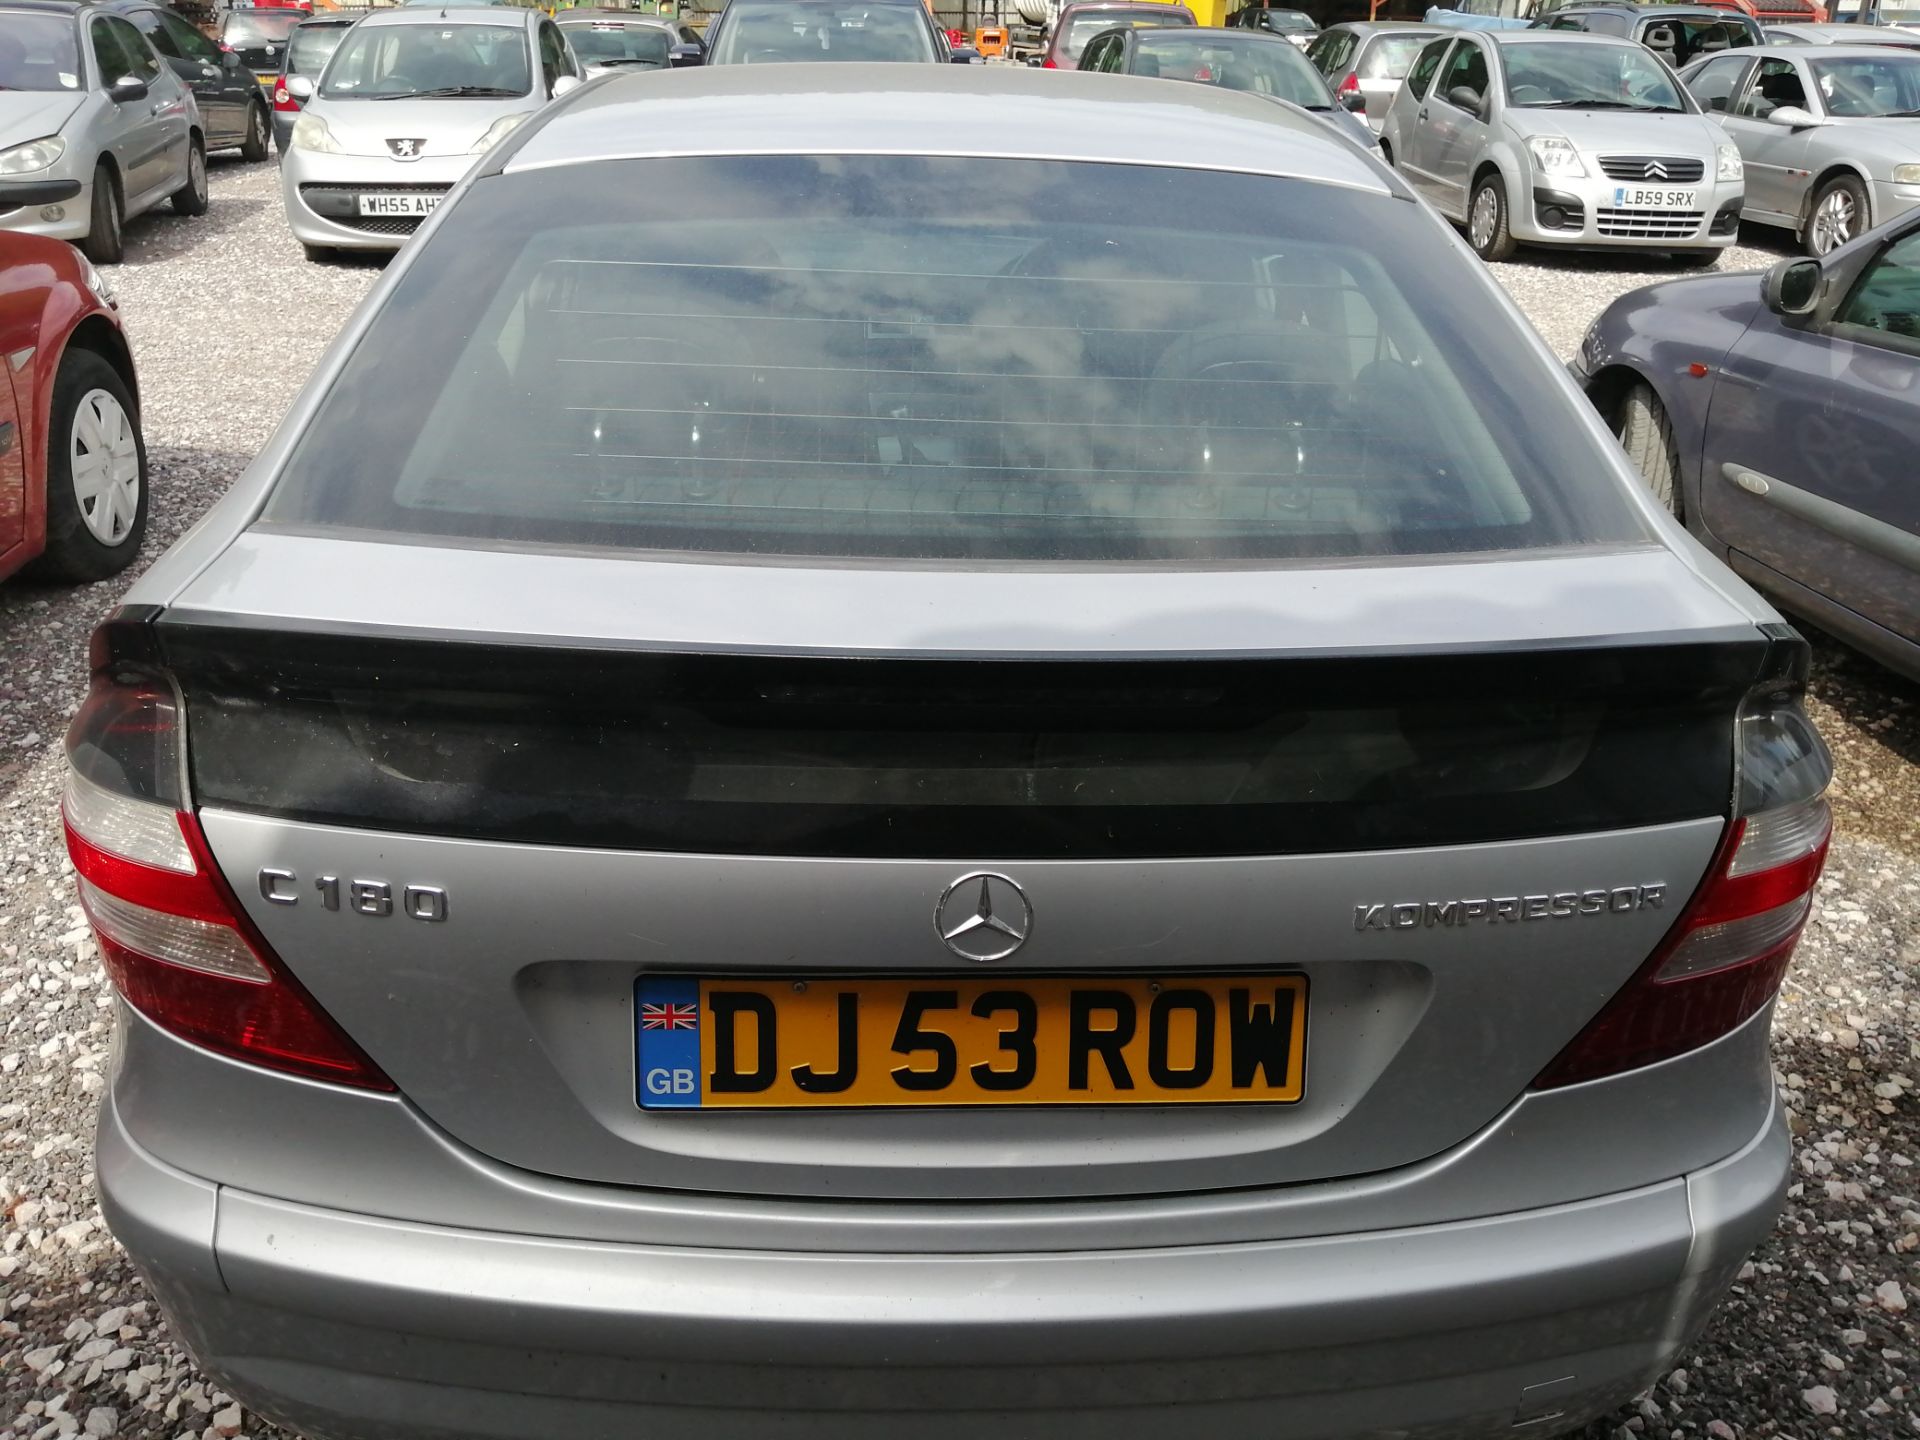 05/53 MERCEDES C180 K SPORT EDITION - 1796cc 3dr Coupe (Silver, 126k) - Image 6 of 7